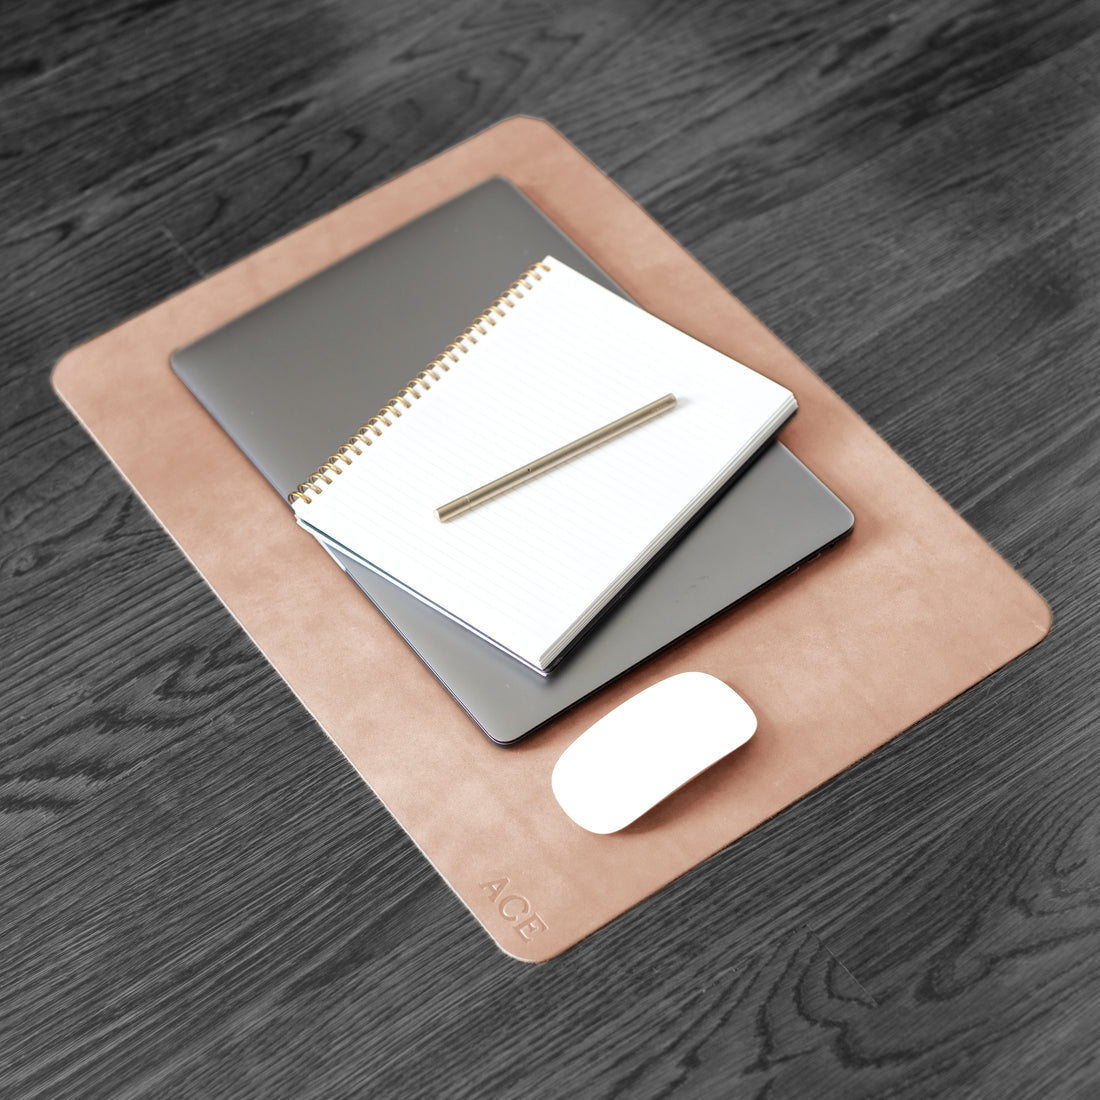 personalized full grain leather desk pad blotter – DMleather